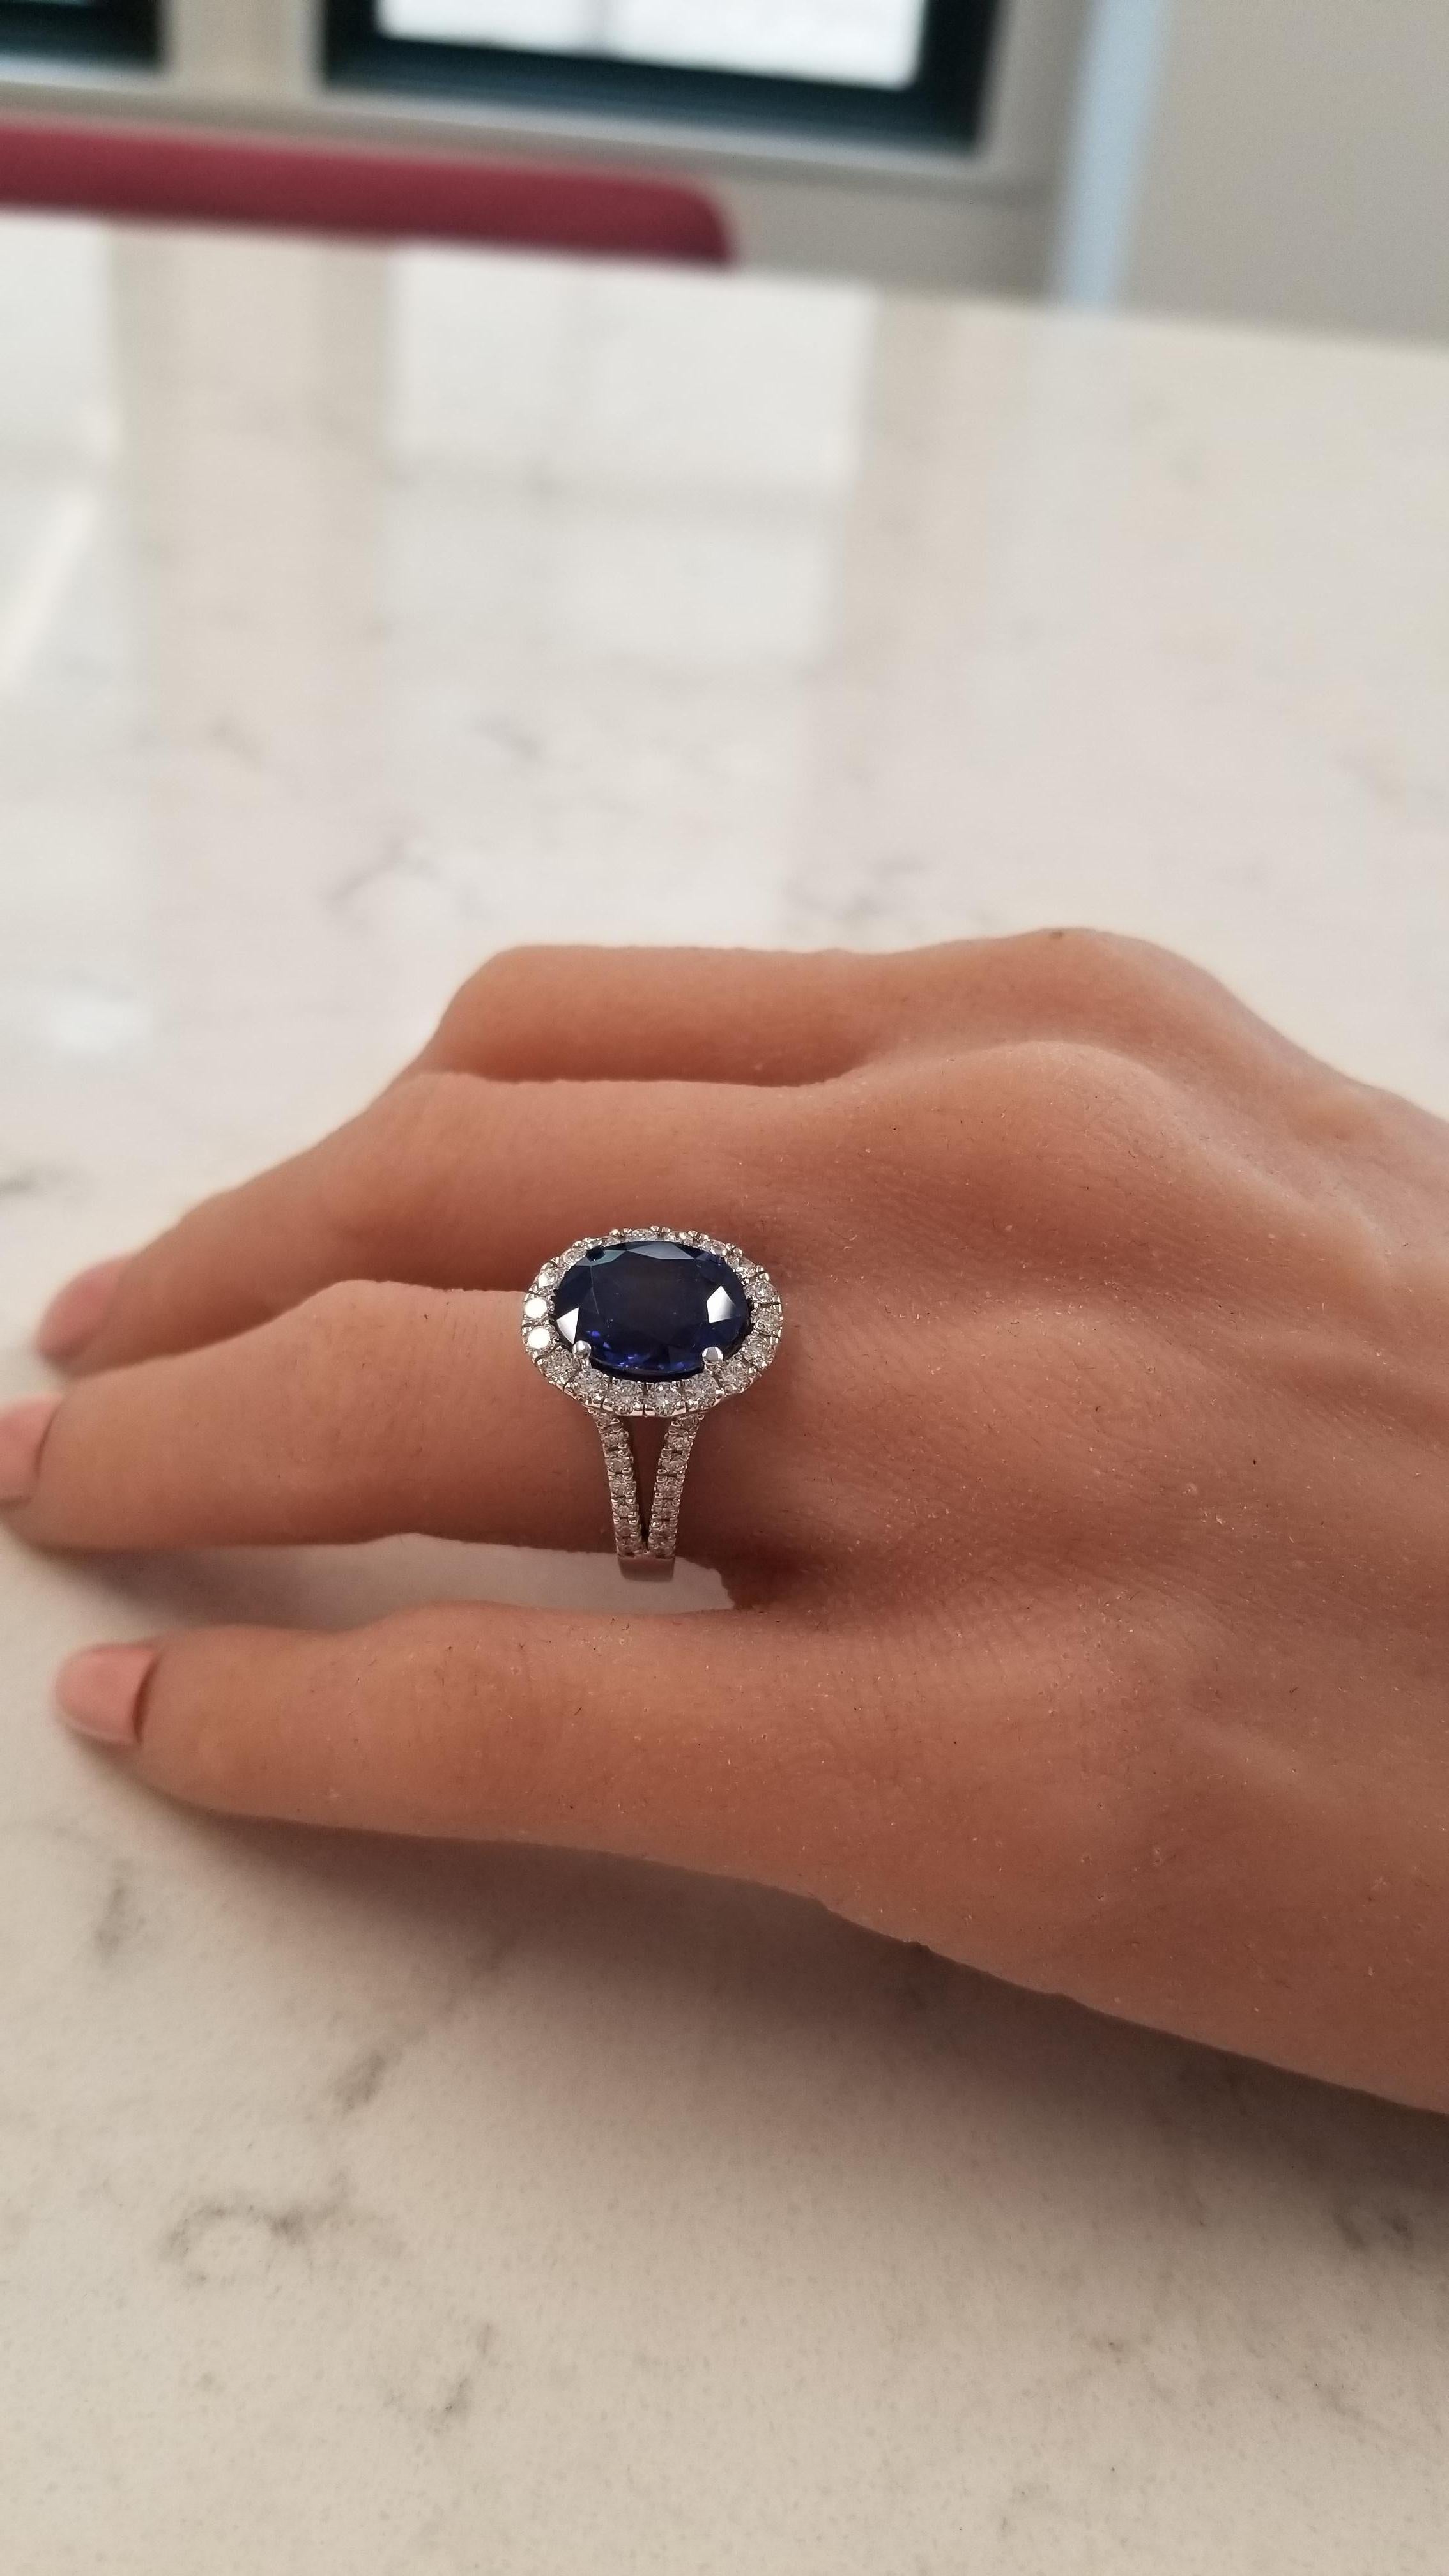 Women's GRS Certified 6.18 Carat Oval Sapphire & Diamond Cocktail Ring In 18K White Gold